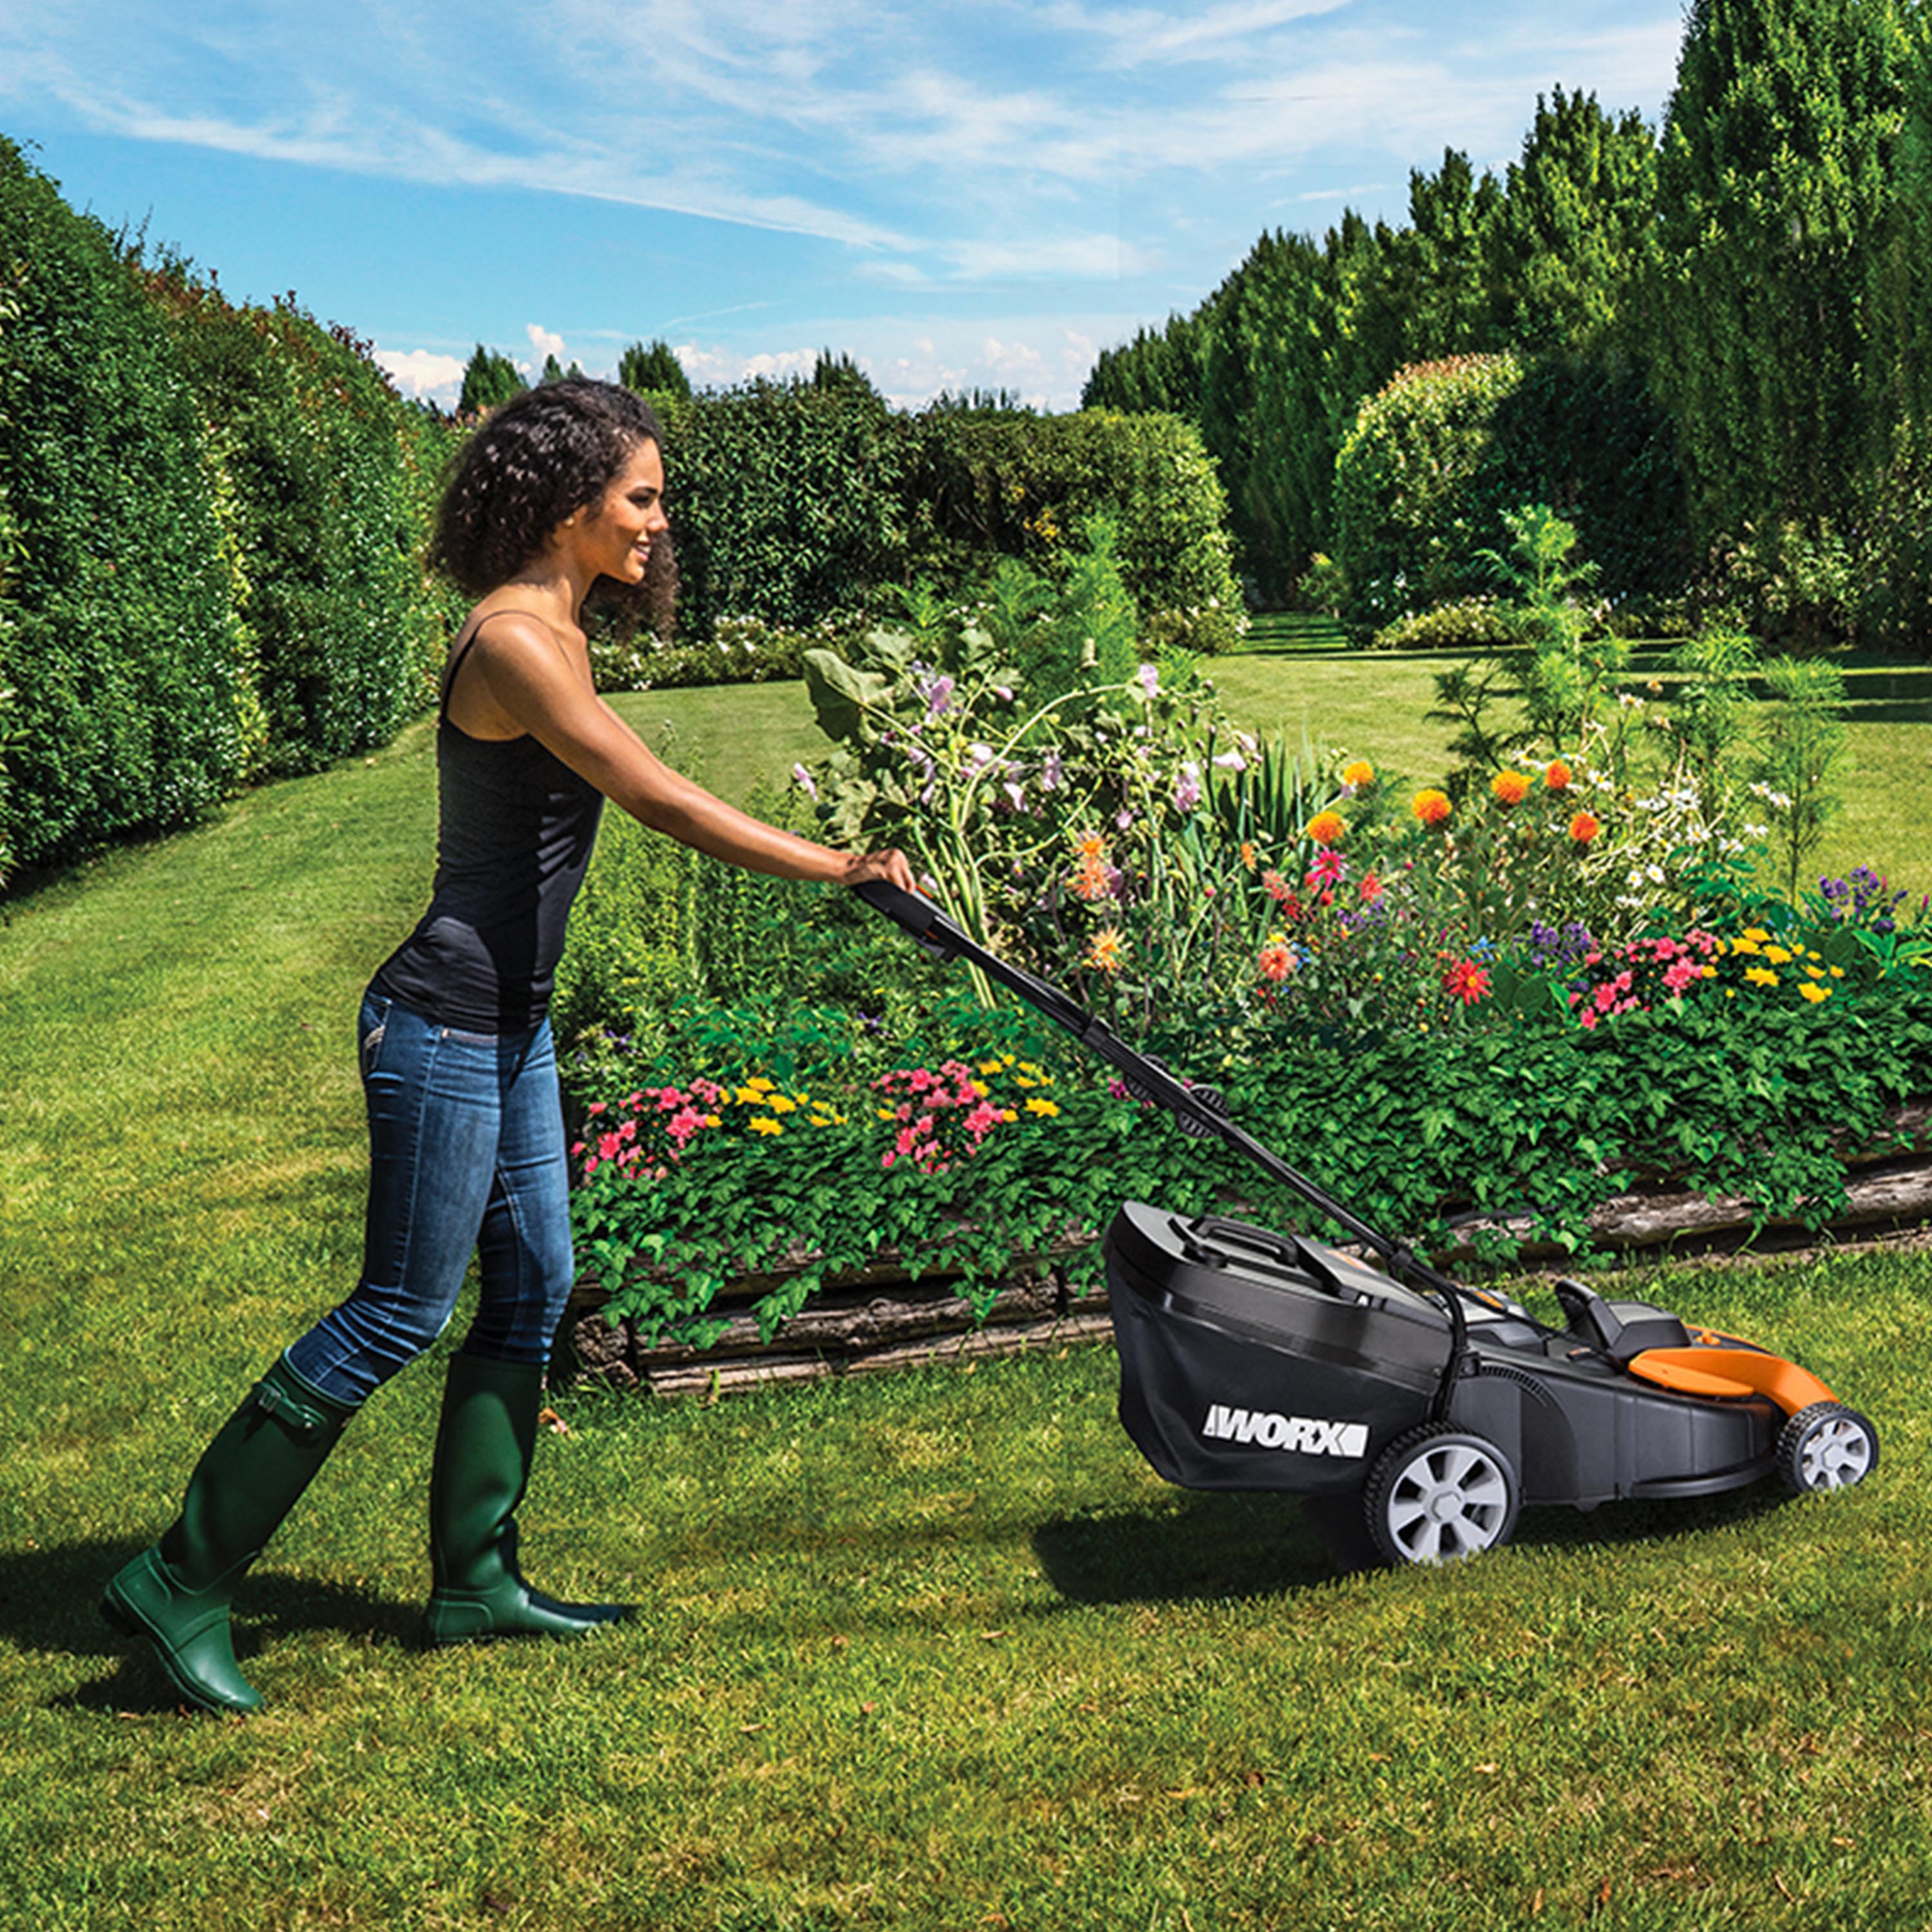 The compact WORX push mower is powered by two, removable, 40V, 2.0 Ah, lithium-ion batteries and cuts up to 5,500 sq. ft. per charge.